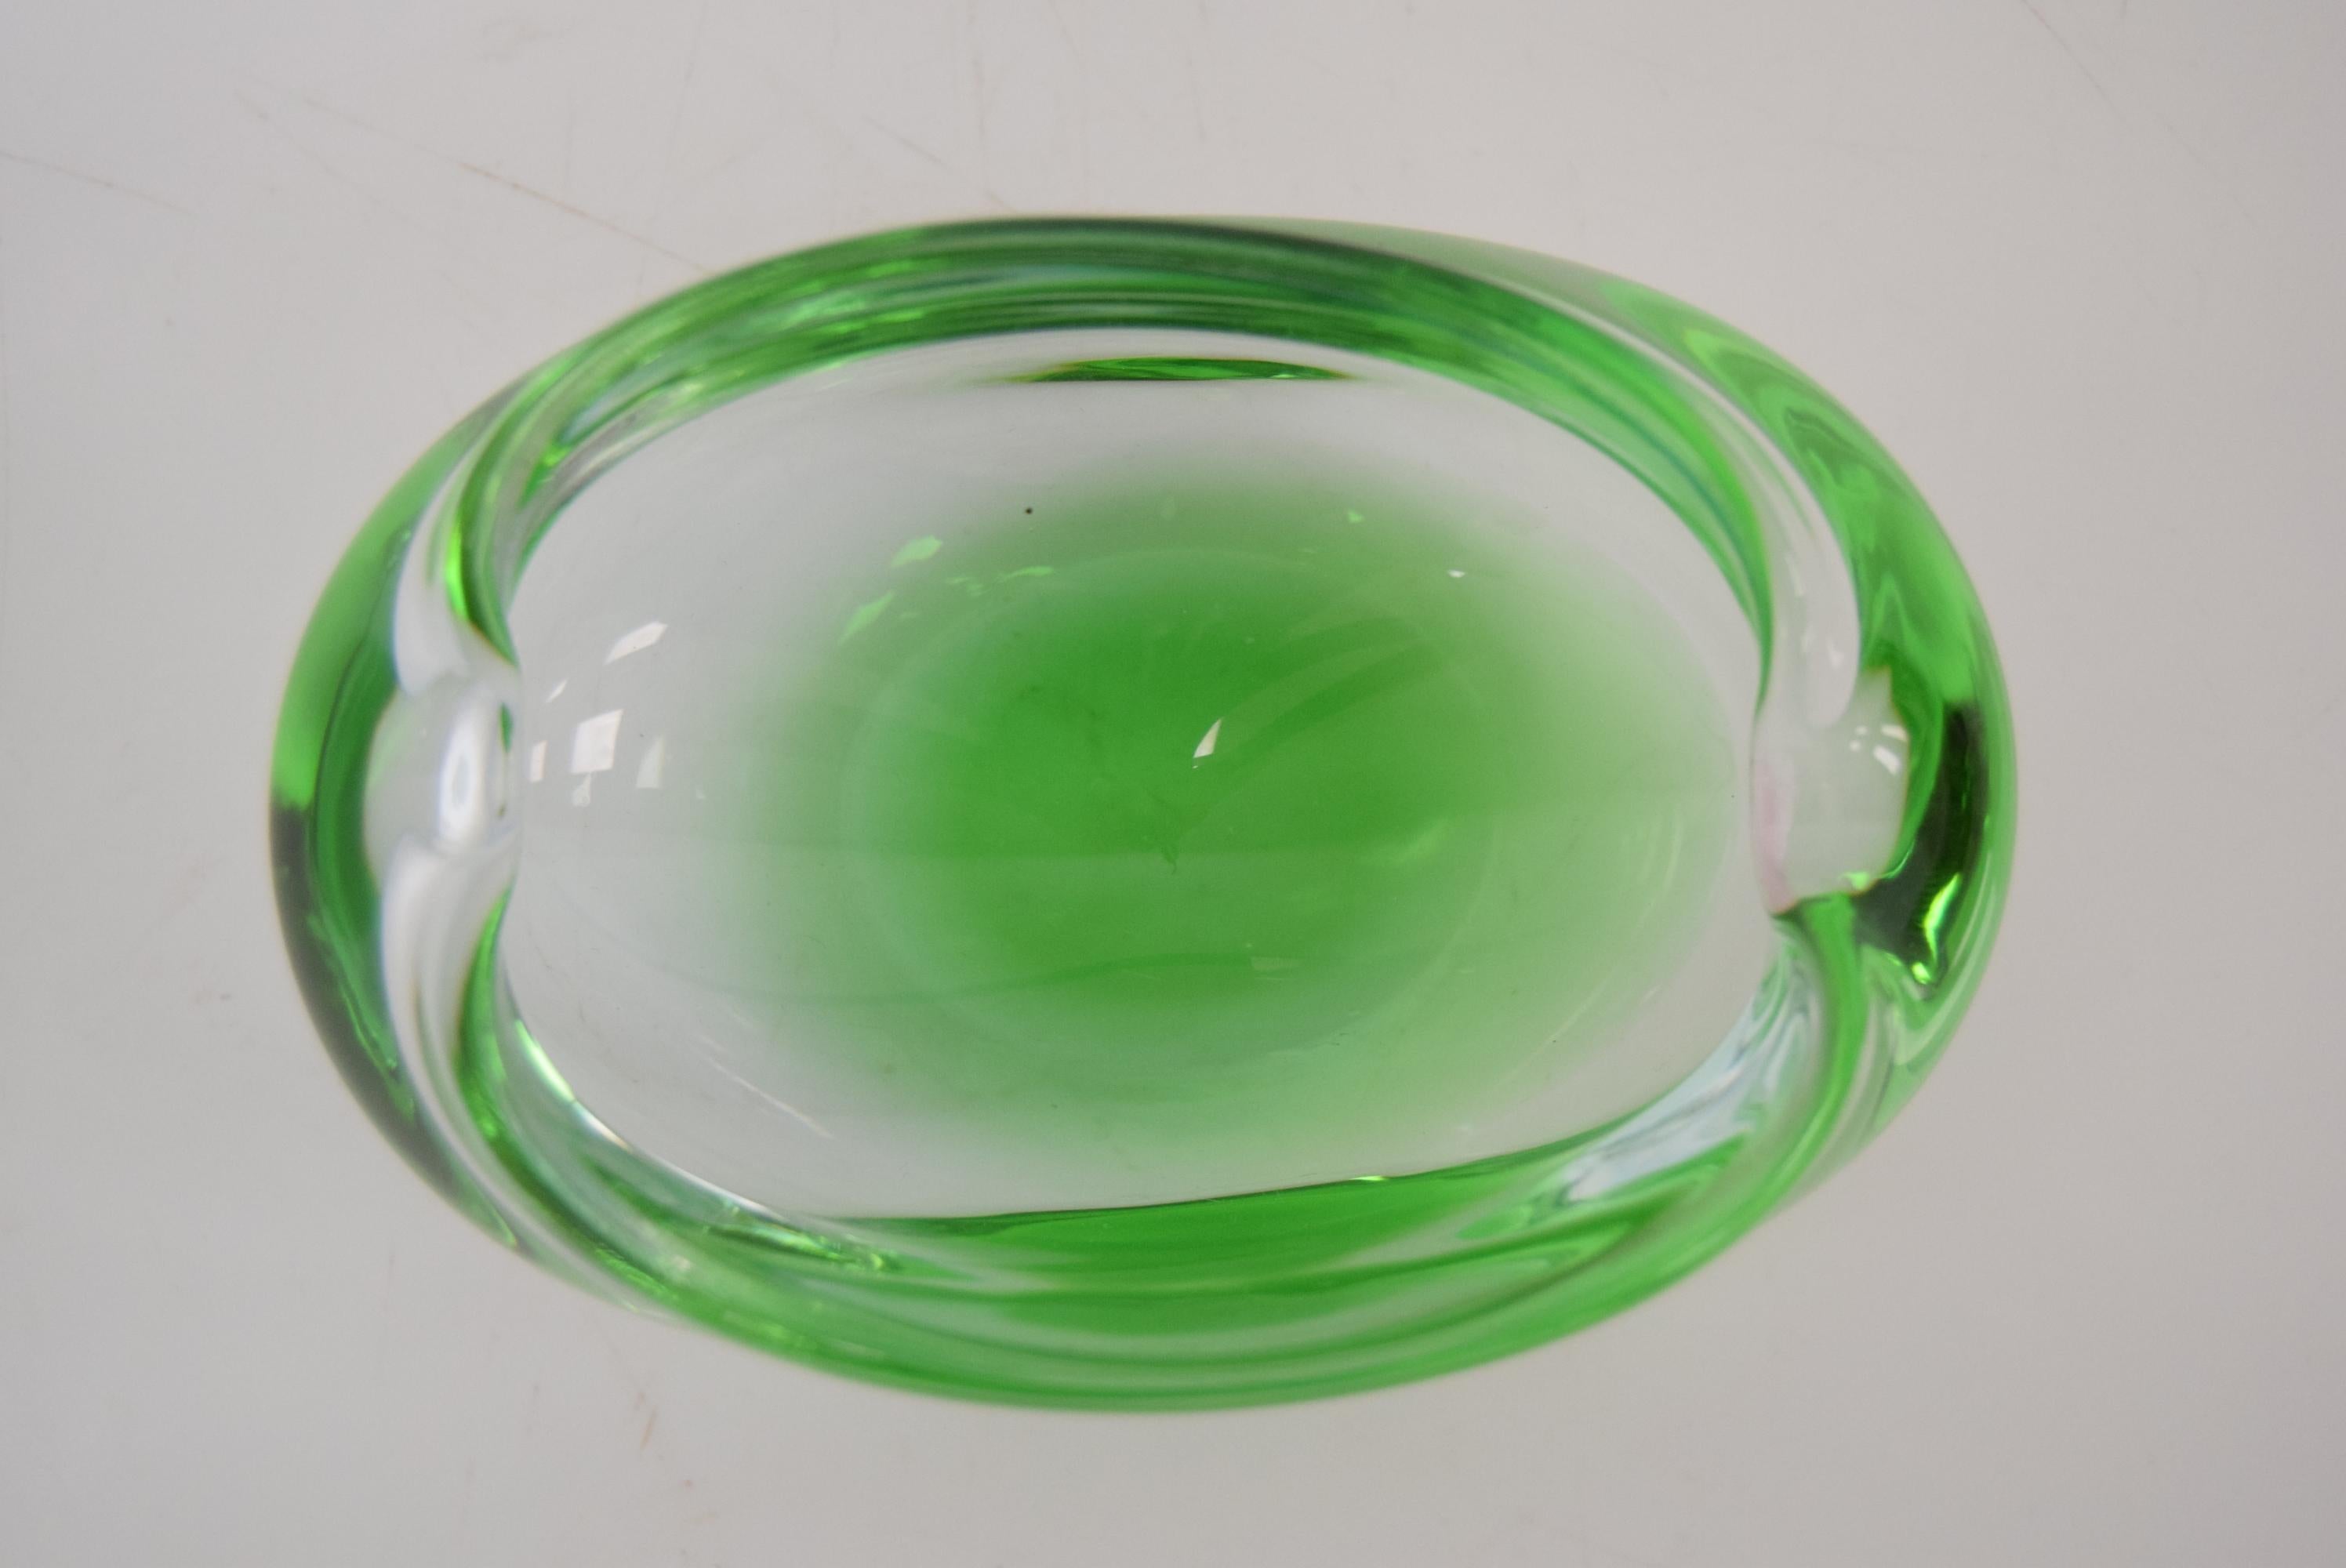 Czech Midcentury Ashtray from Metallurgical Glass, by Glasswork Novy Bor, 1960s For Sale